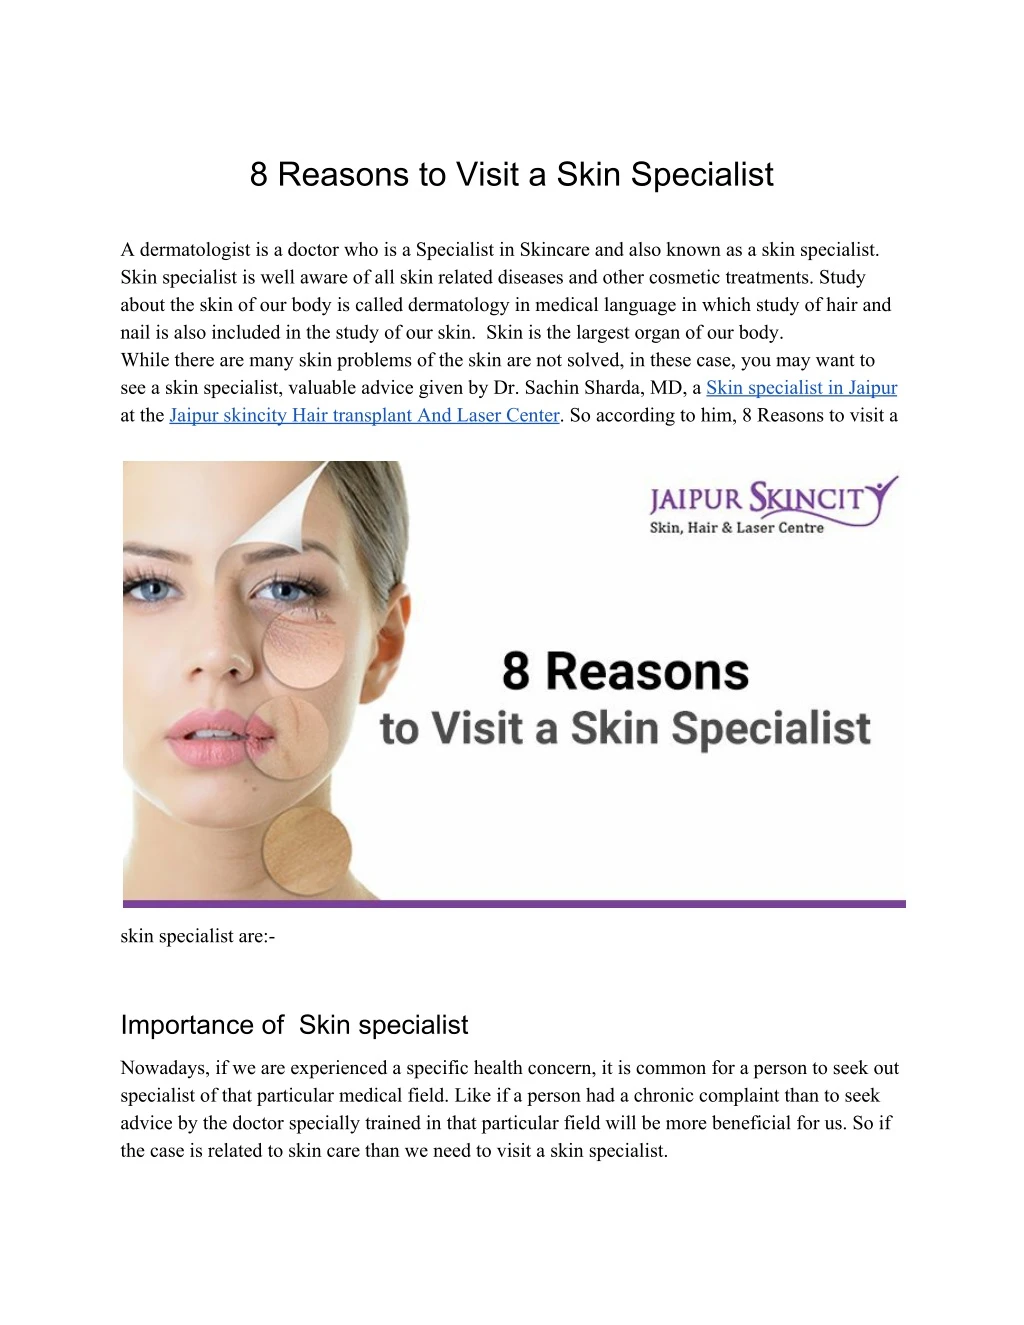 8 reasons to visit a skin specialist